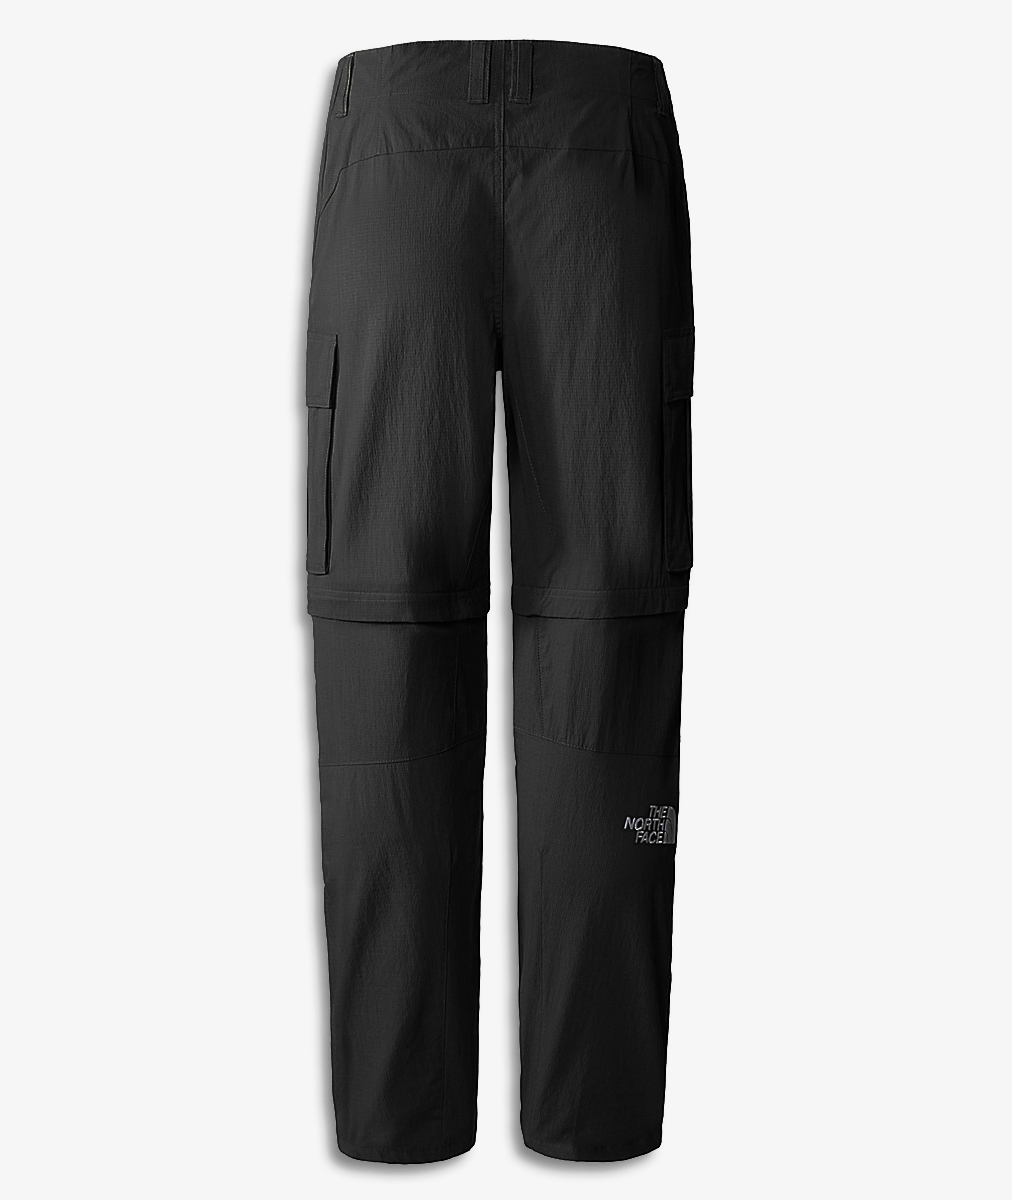 Buy The North Face Women's Sally Pant, TNF Black, L Regular at Amazon.in